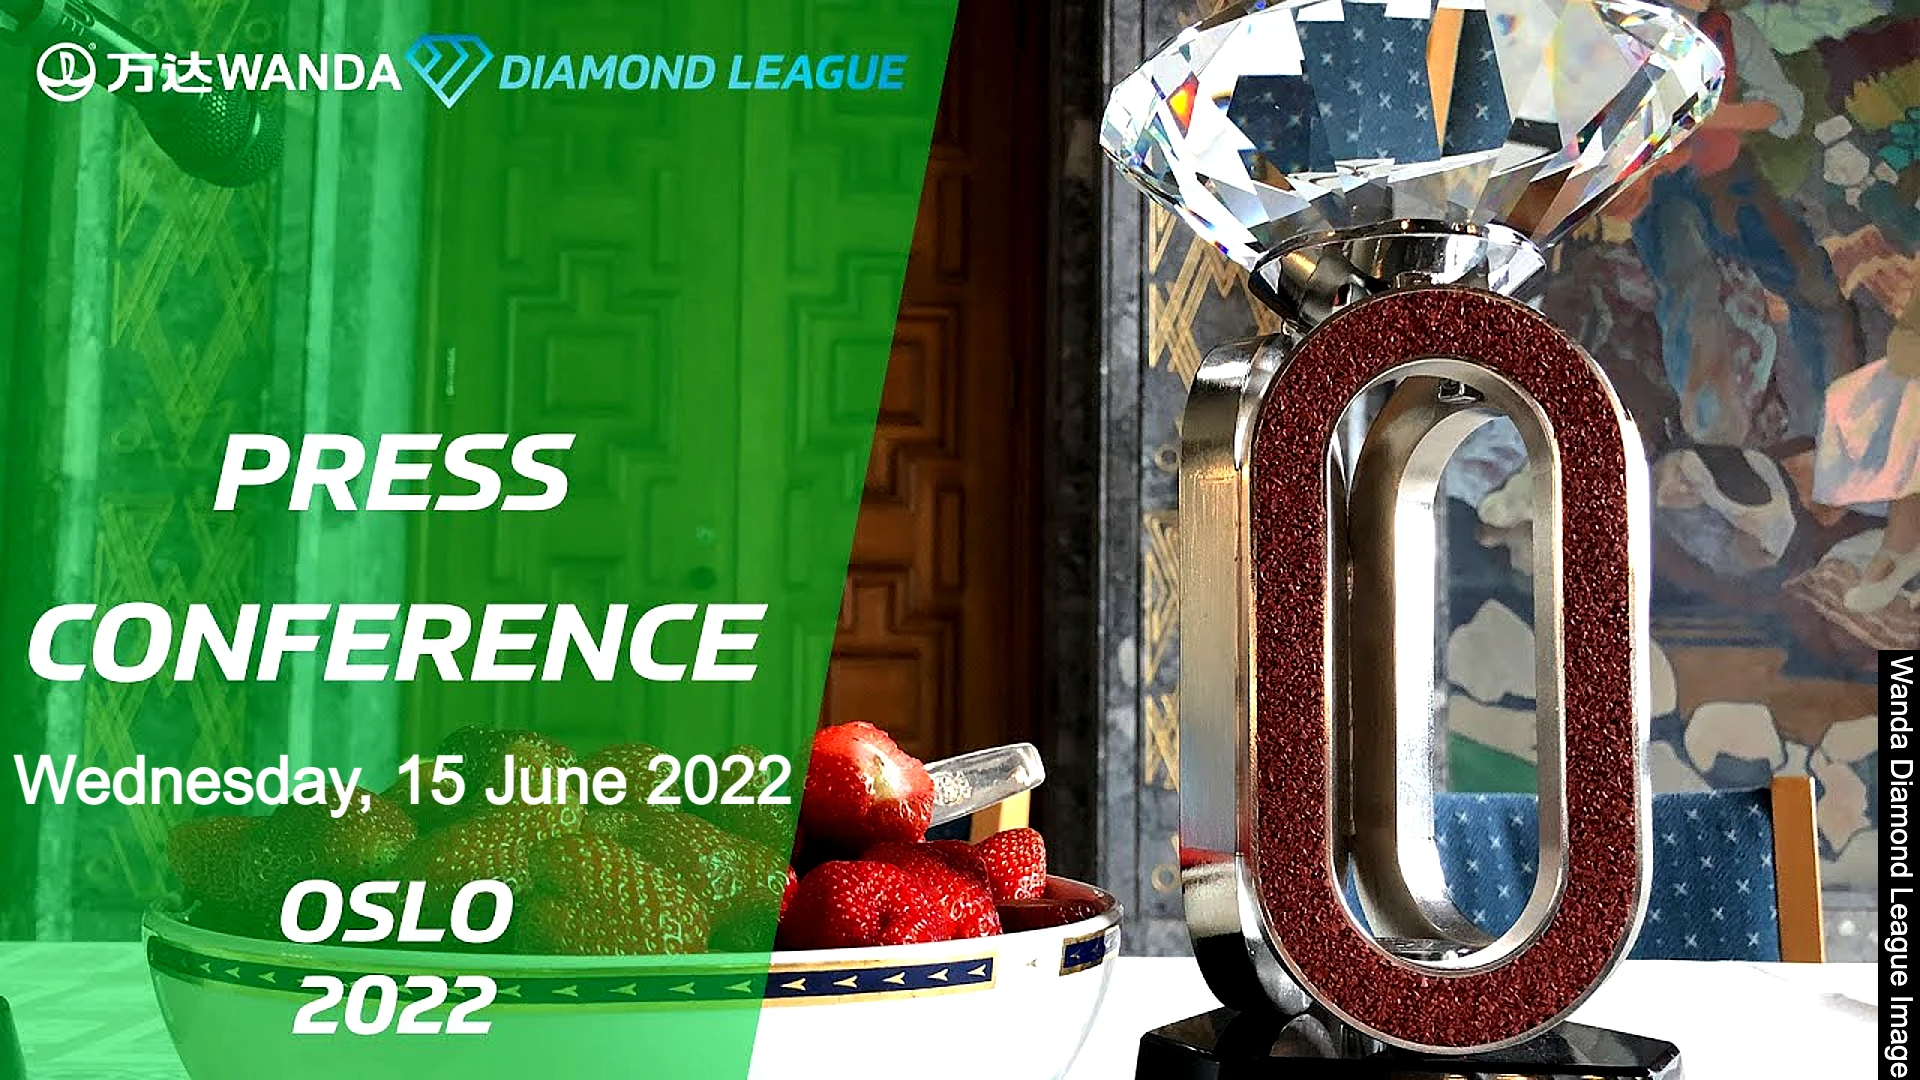 You can Watch the Oslo Diamond League 2022 Press Conference Live Stream